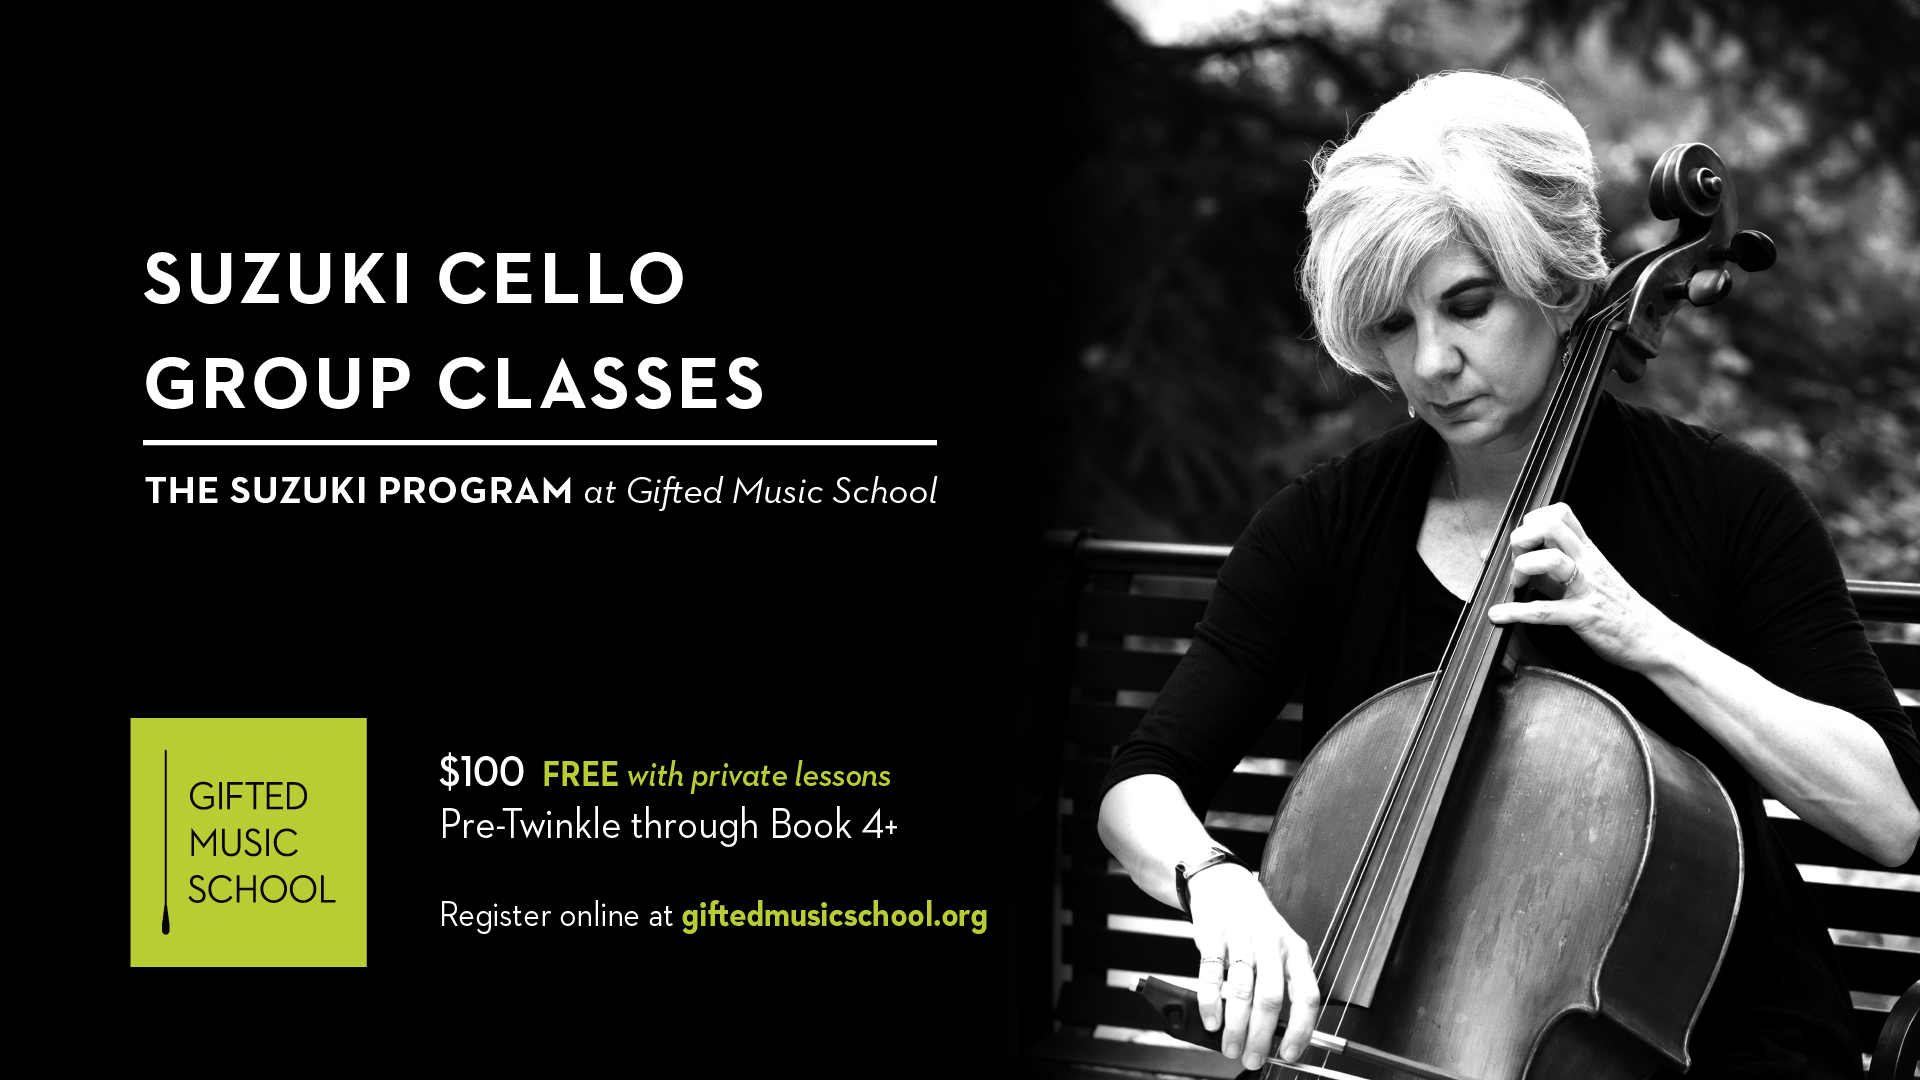 Gifted Music School Cello Group Class Advertisement with Katherine Baird playing cello